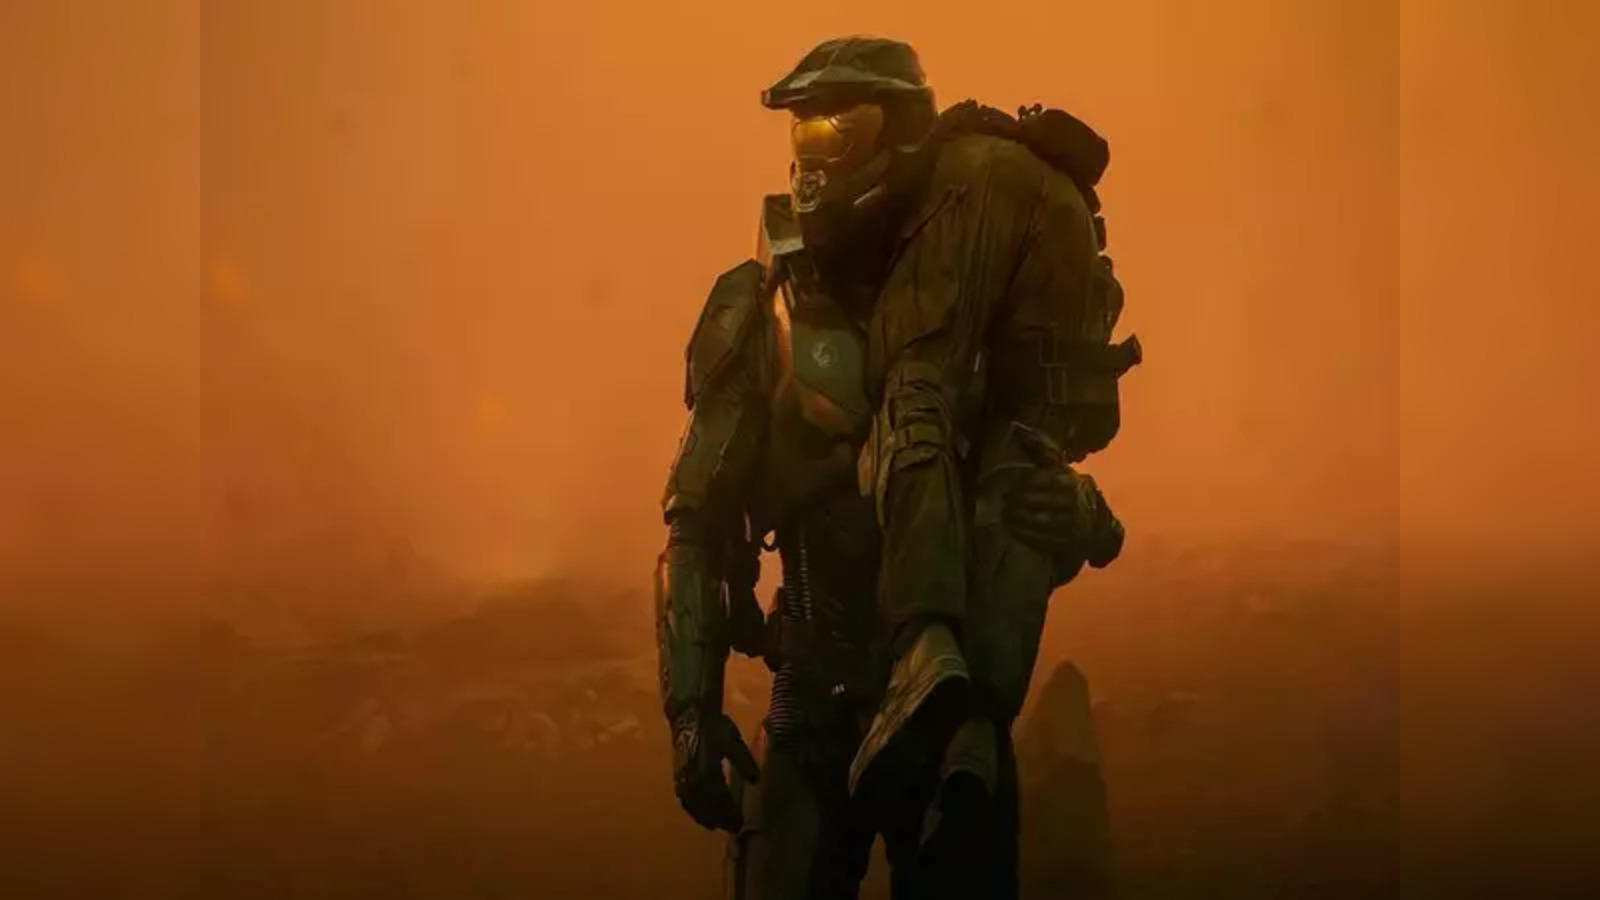 Halo The Series, Series Premiere, Full Episode